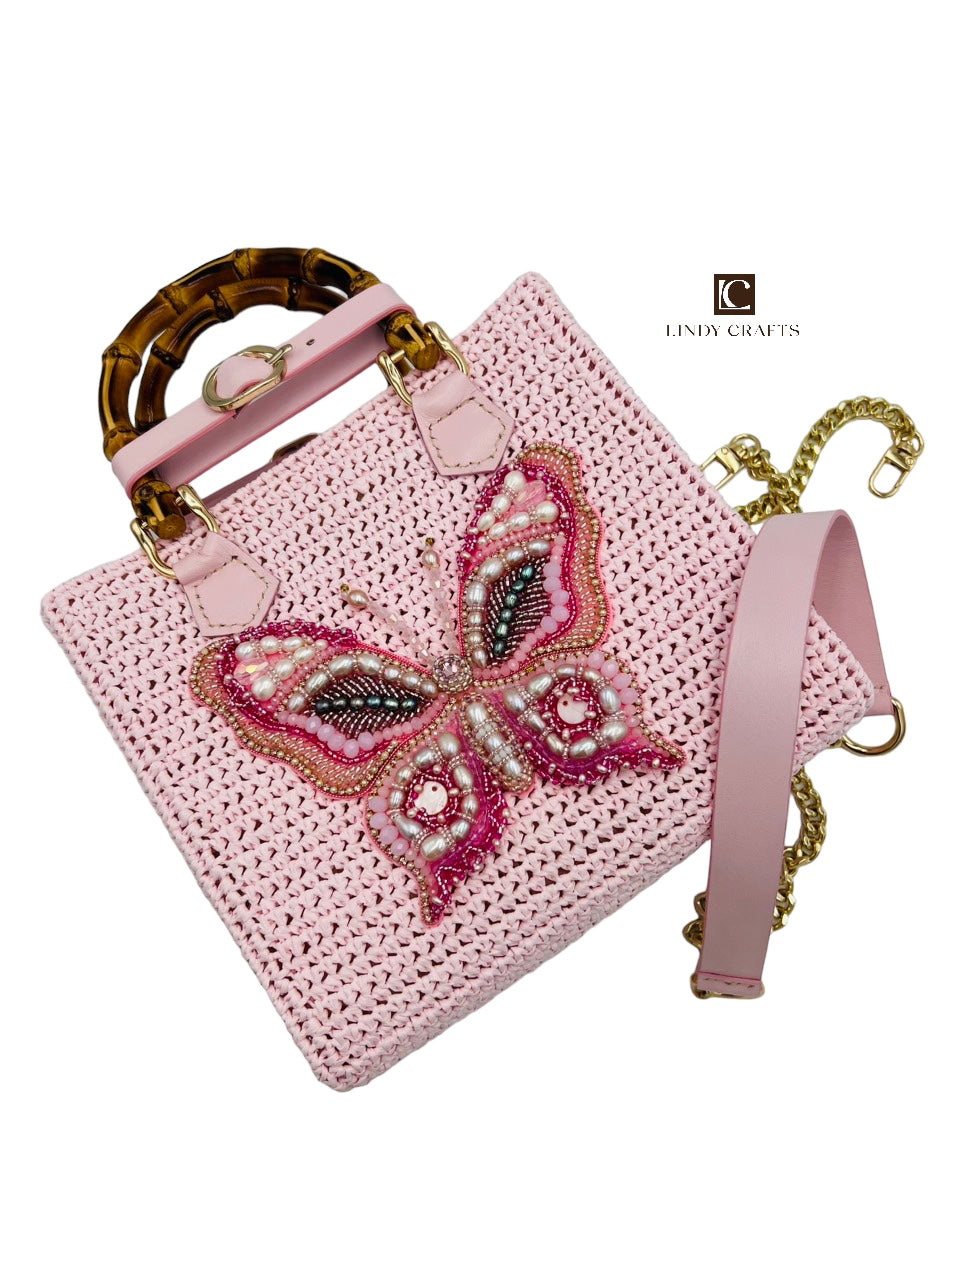 Spring Butterfly Ballet Bamboo Bag in Cherry Blossom Pink - Made to order